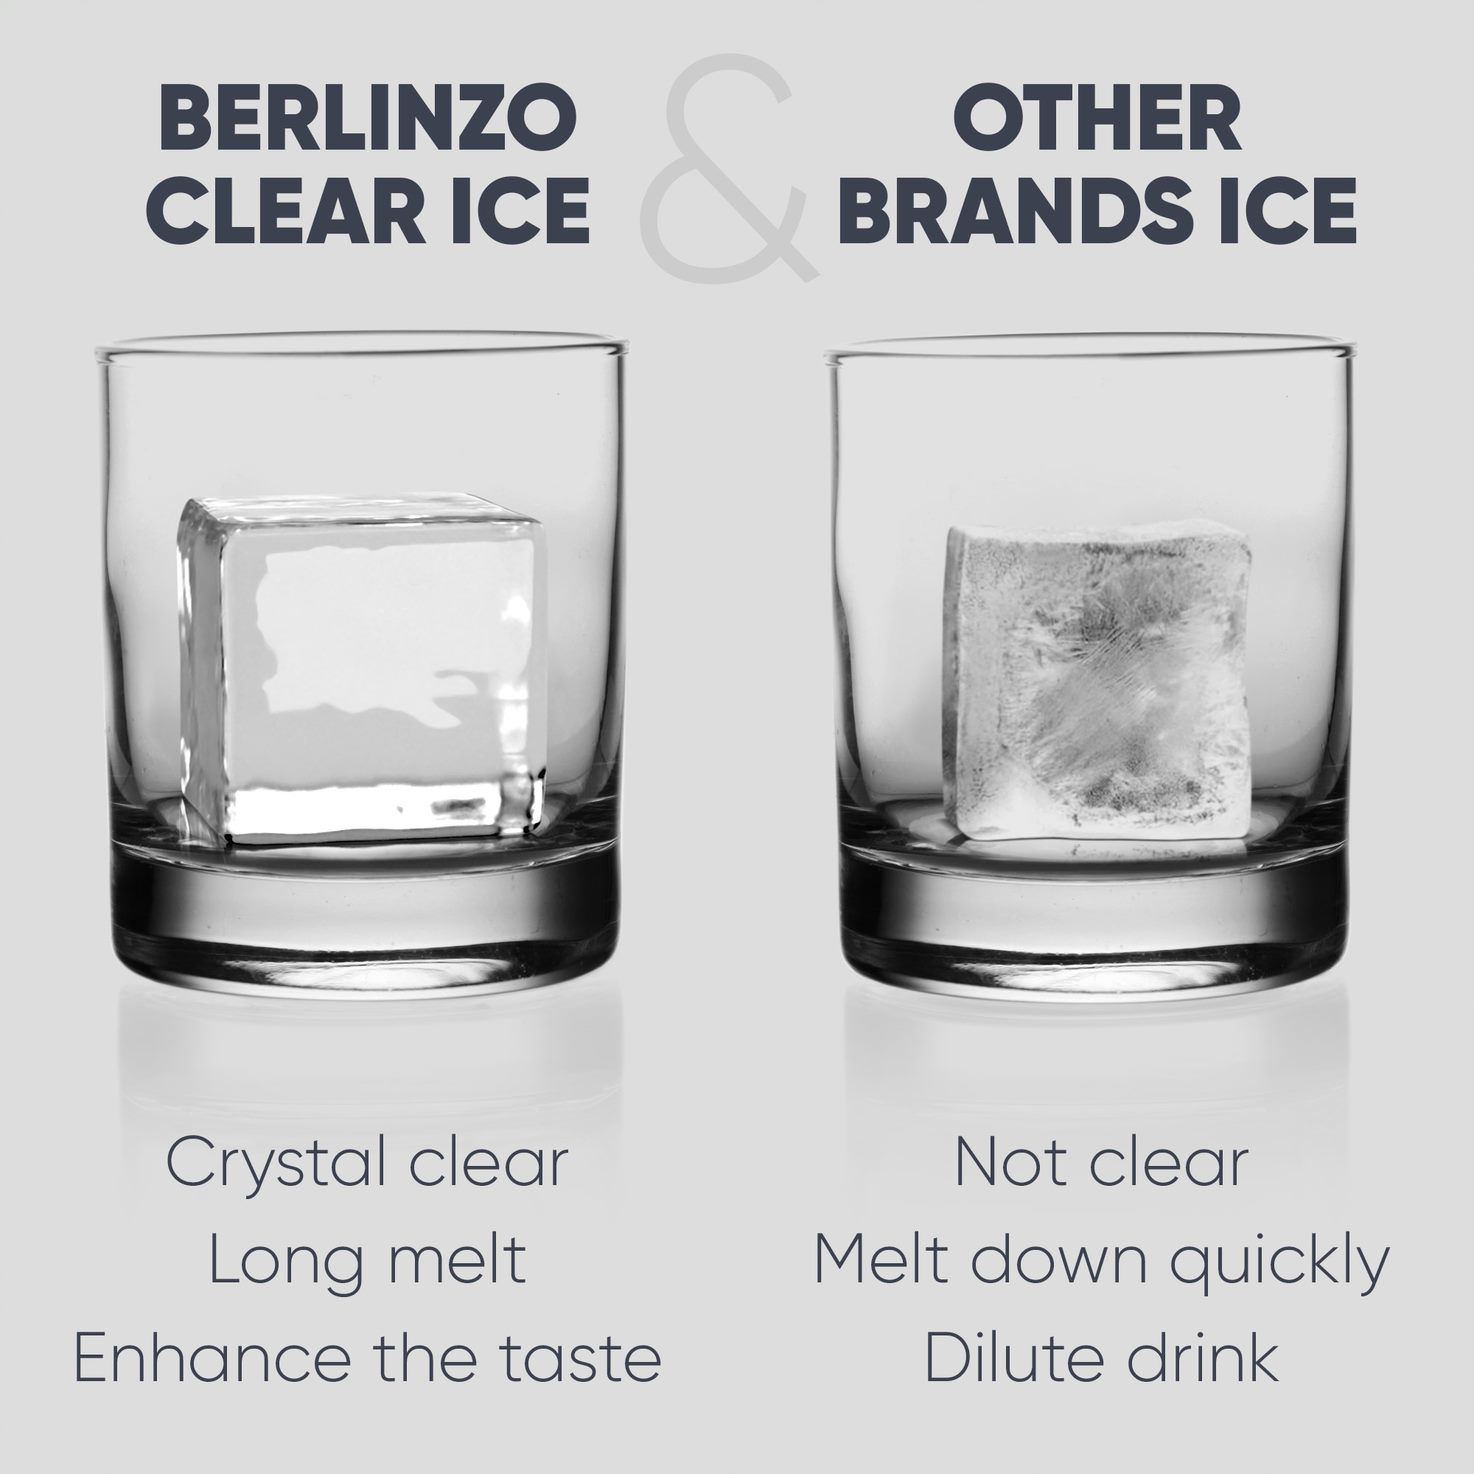 How to Make Clear Ice at Home. – BERLINZO